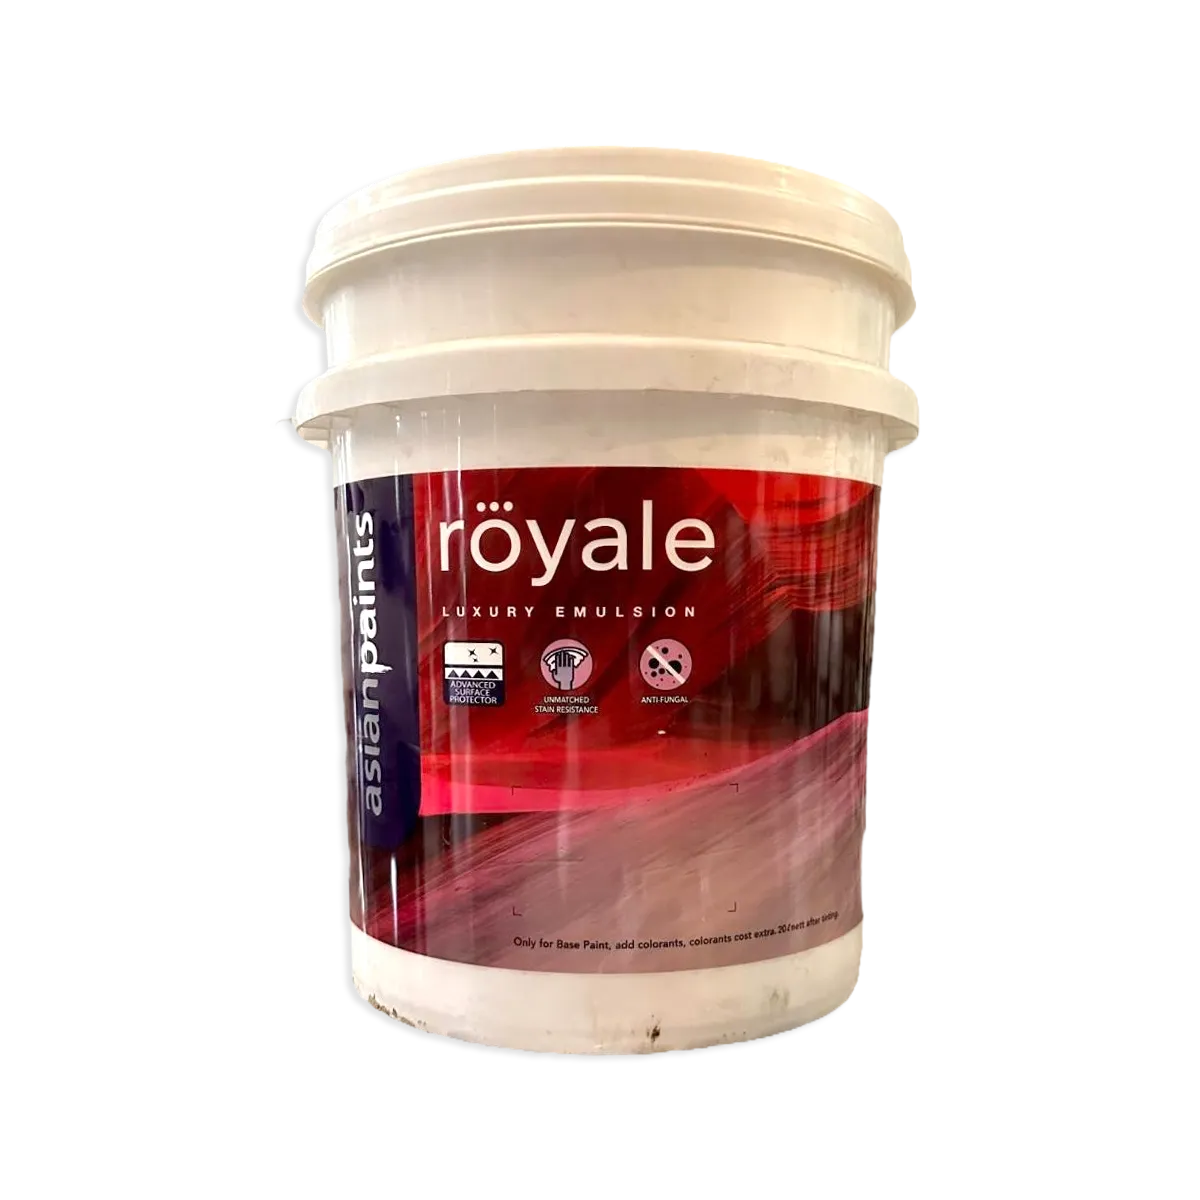 Asian Paints Royal Luxury Emulsion RB1/6, RB10/YTB/RTB, RB20 - 20Ltr